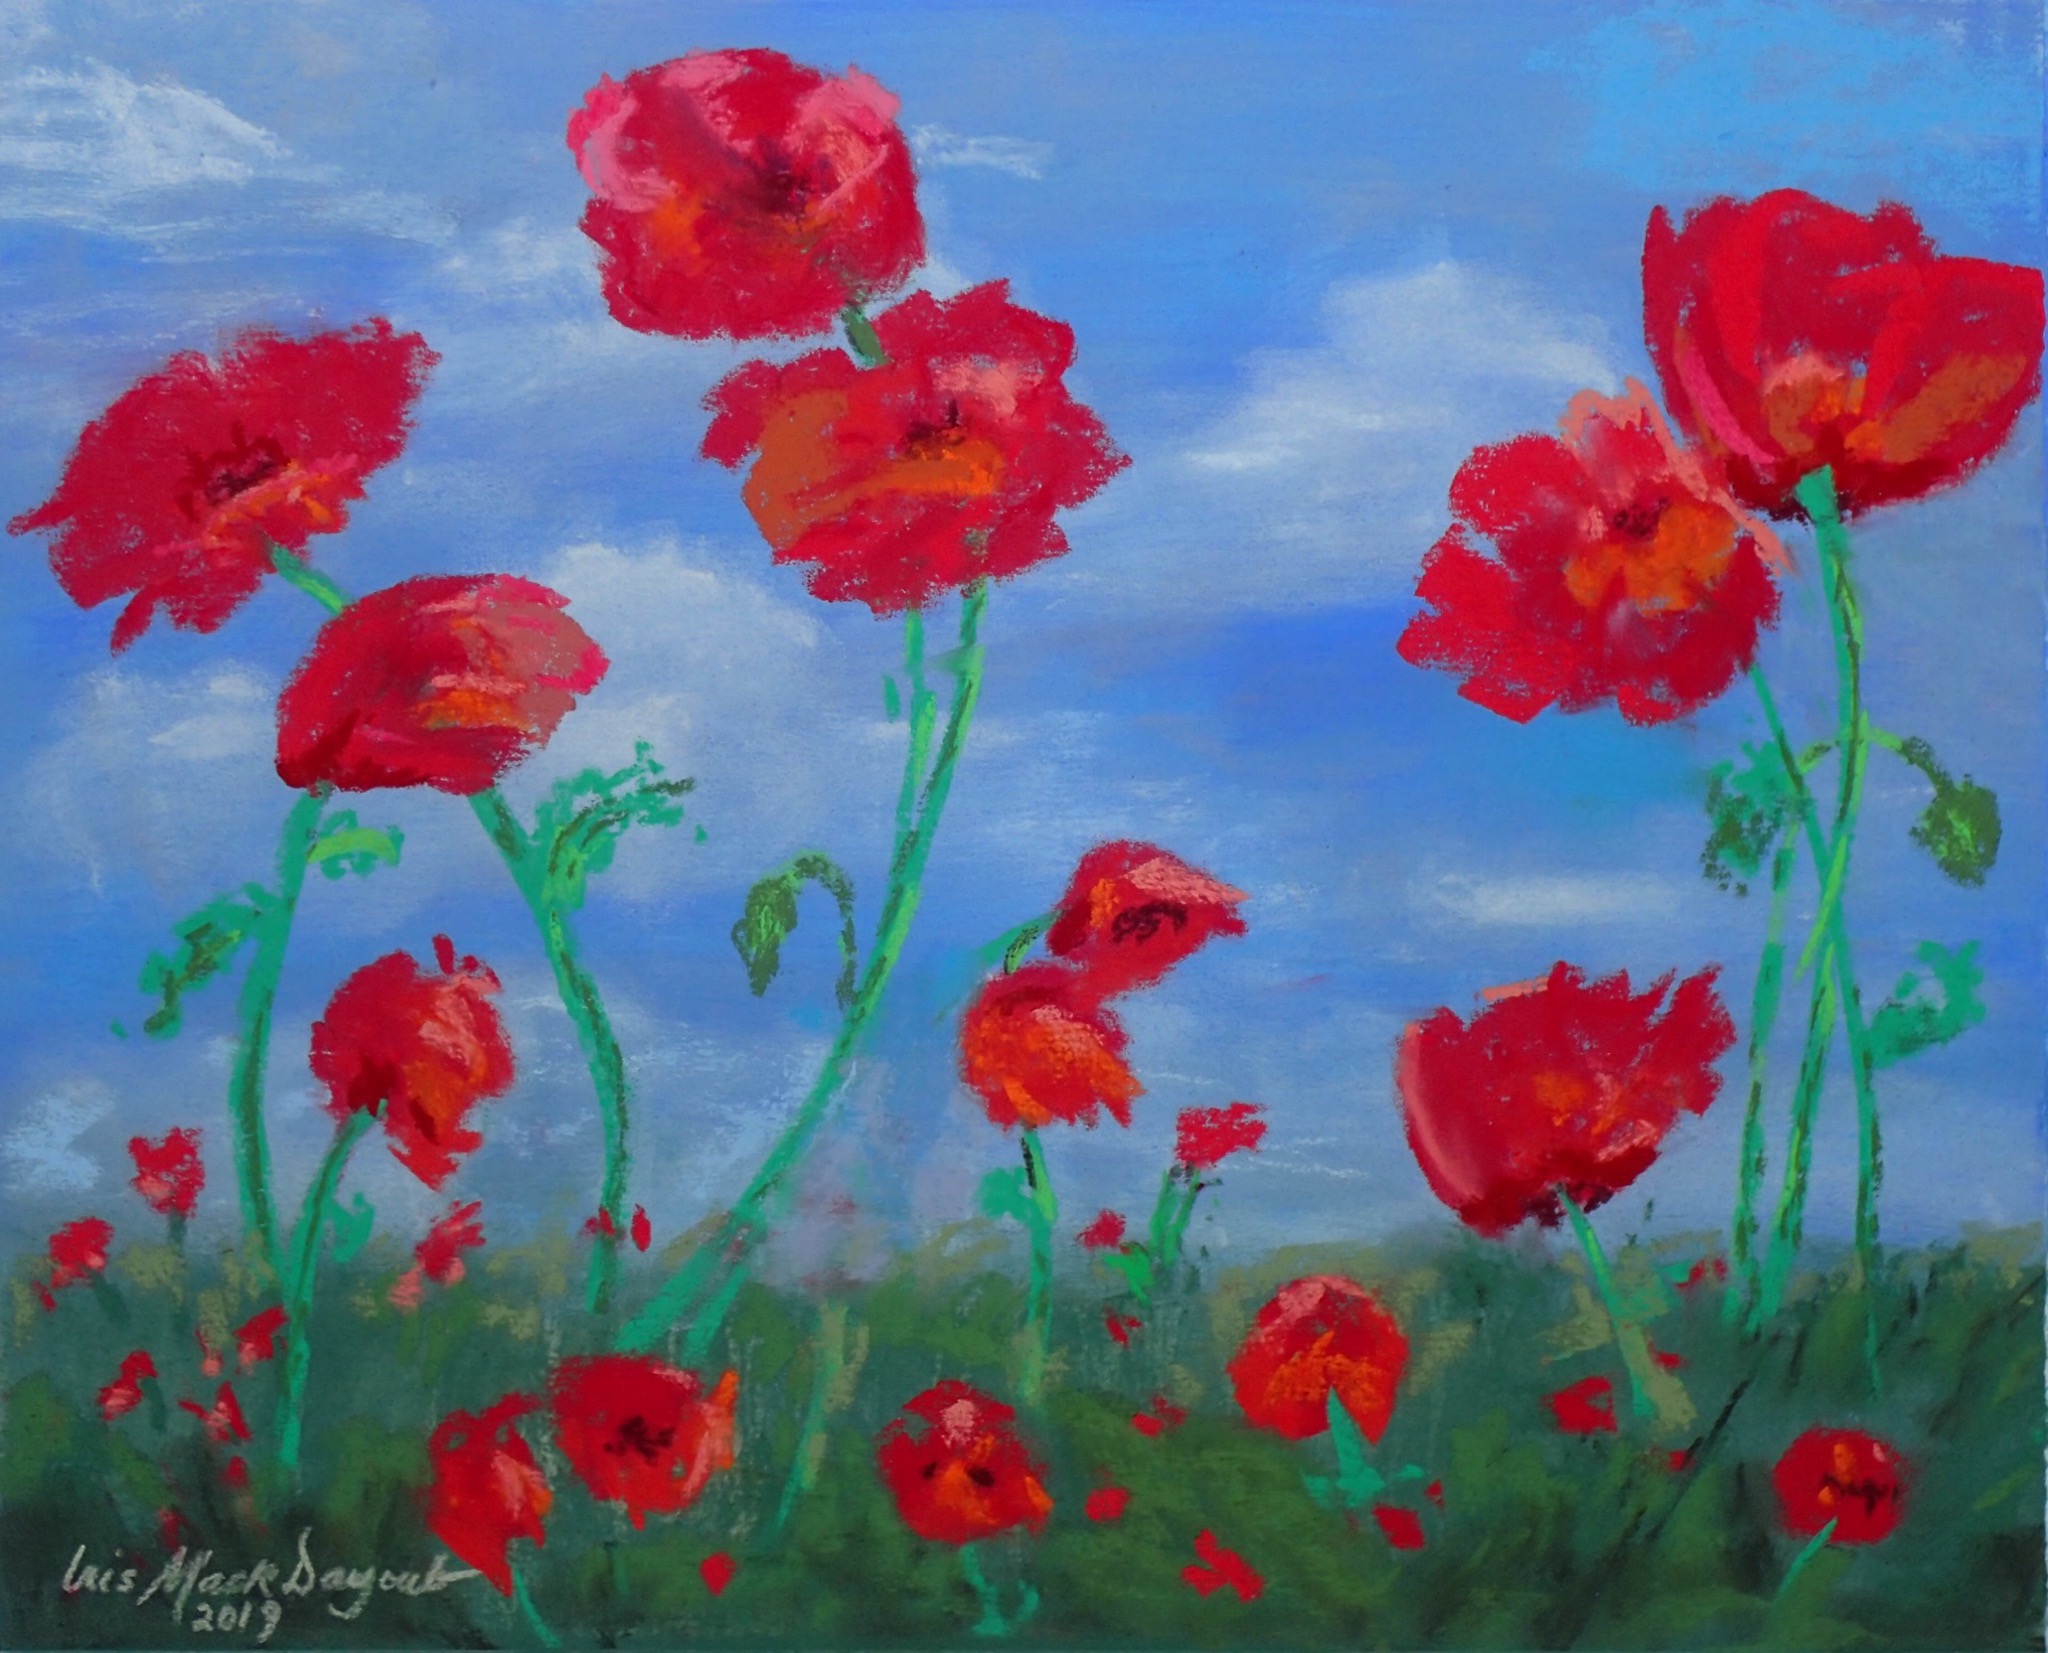 Poppies with sky in background